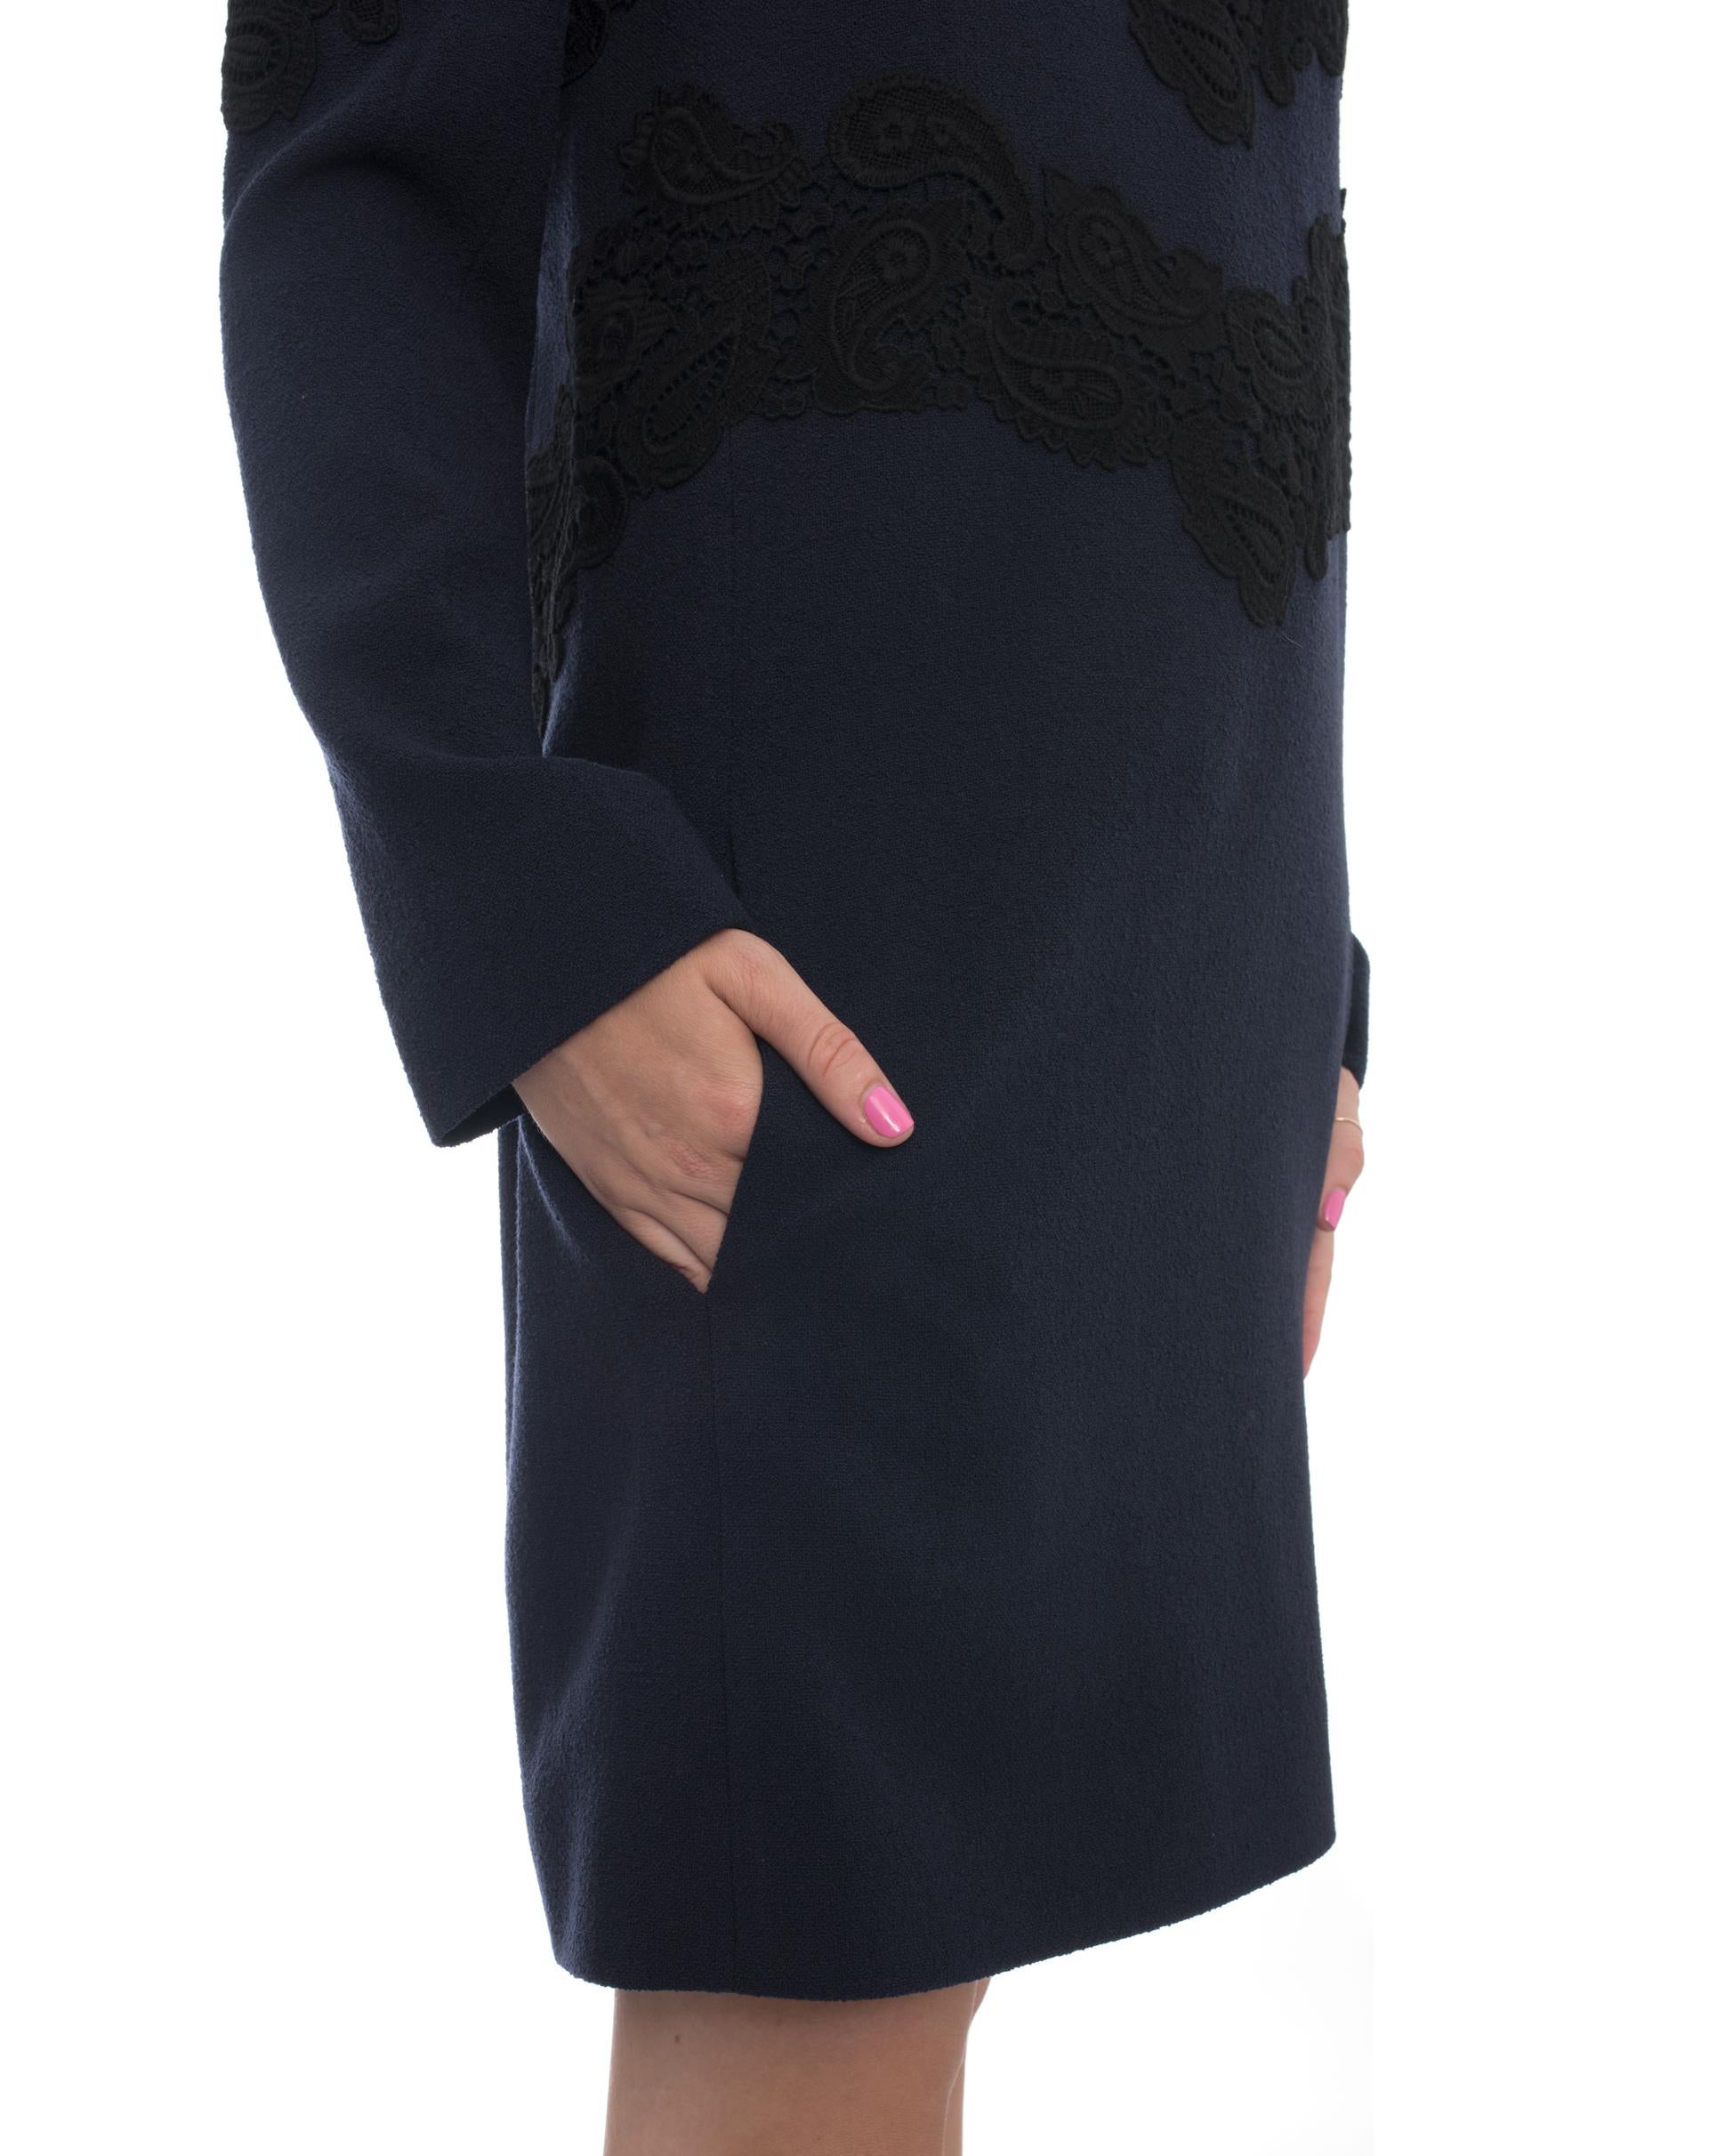 Chloe Navy Wool Long Sleeve Dress with Black Lace - 6 3